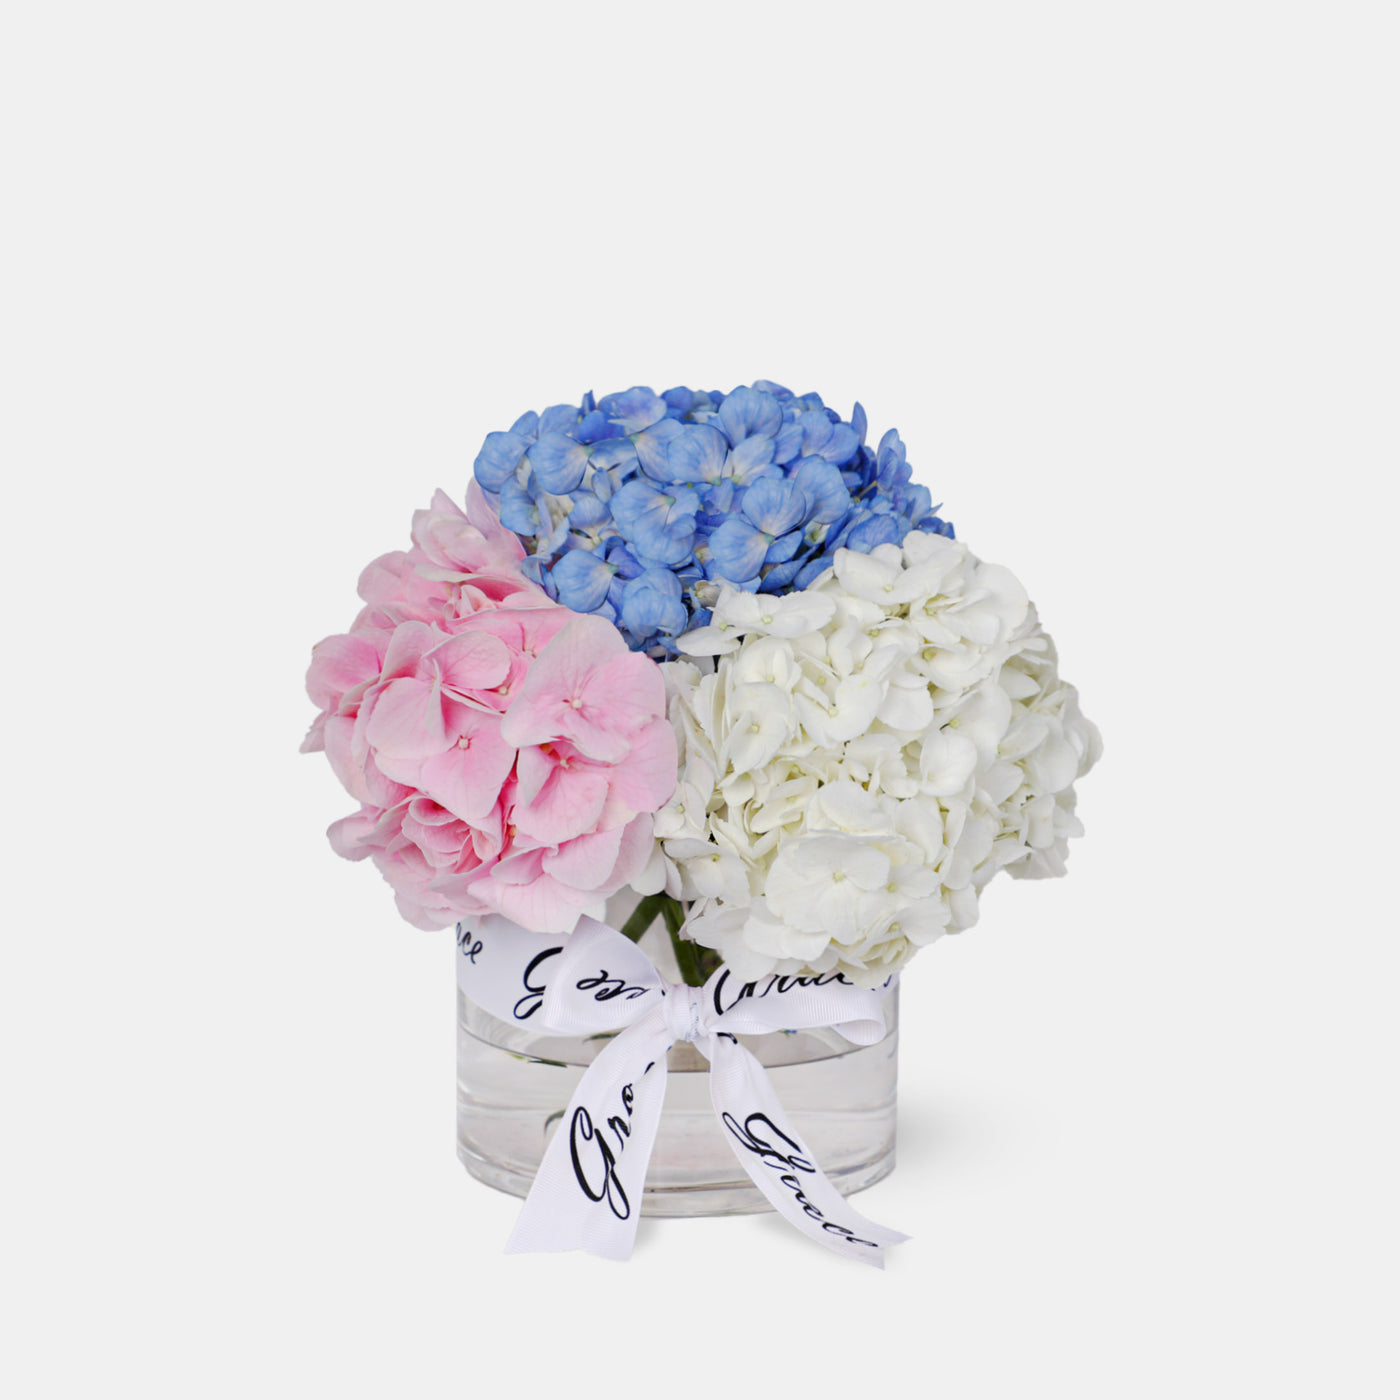 Cotton Candy in Vase